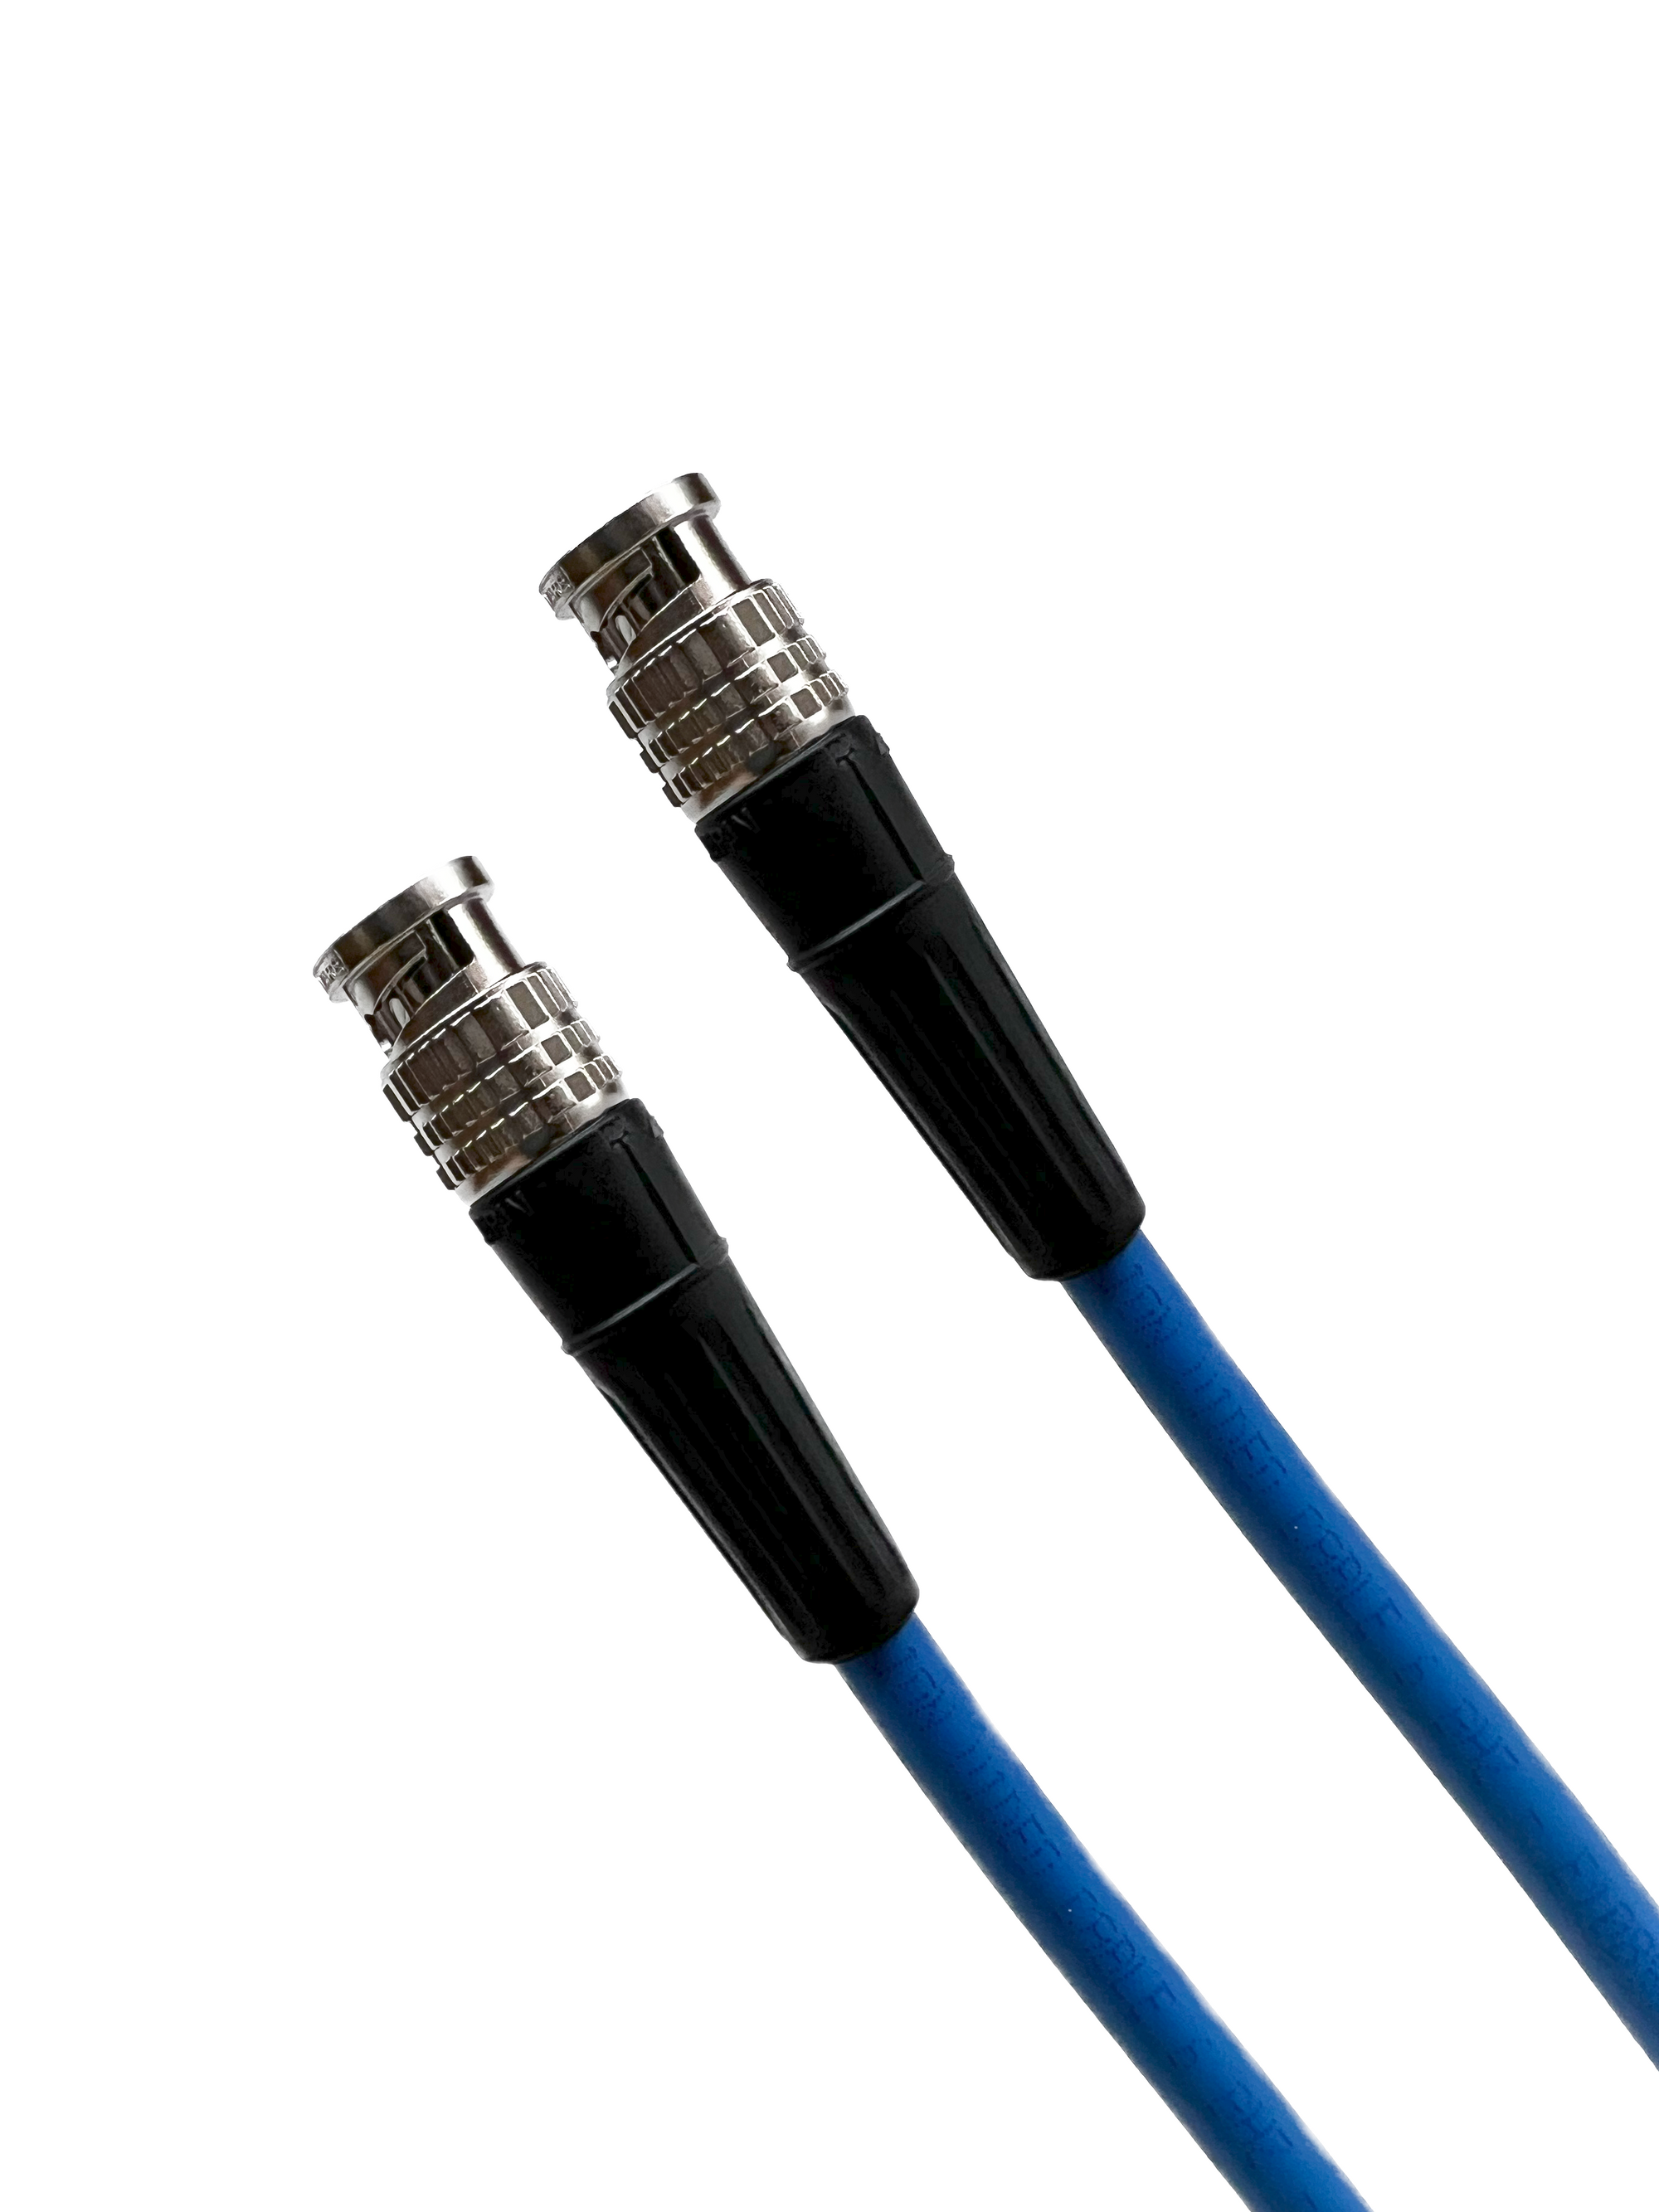 Belden 1694A 3G/6G HD-SDI RG6 BNC Cable with Canare BCP-B53 BNC